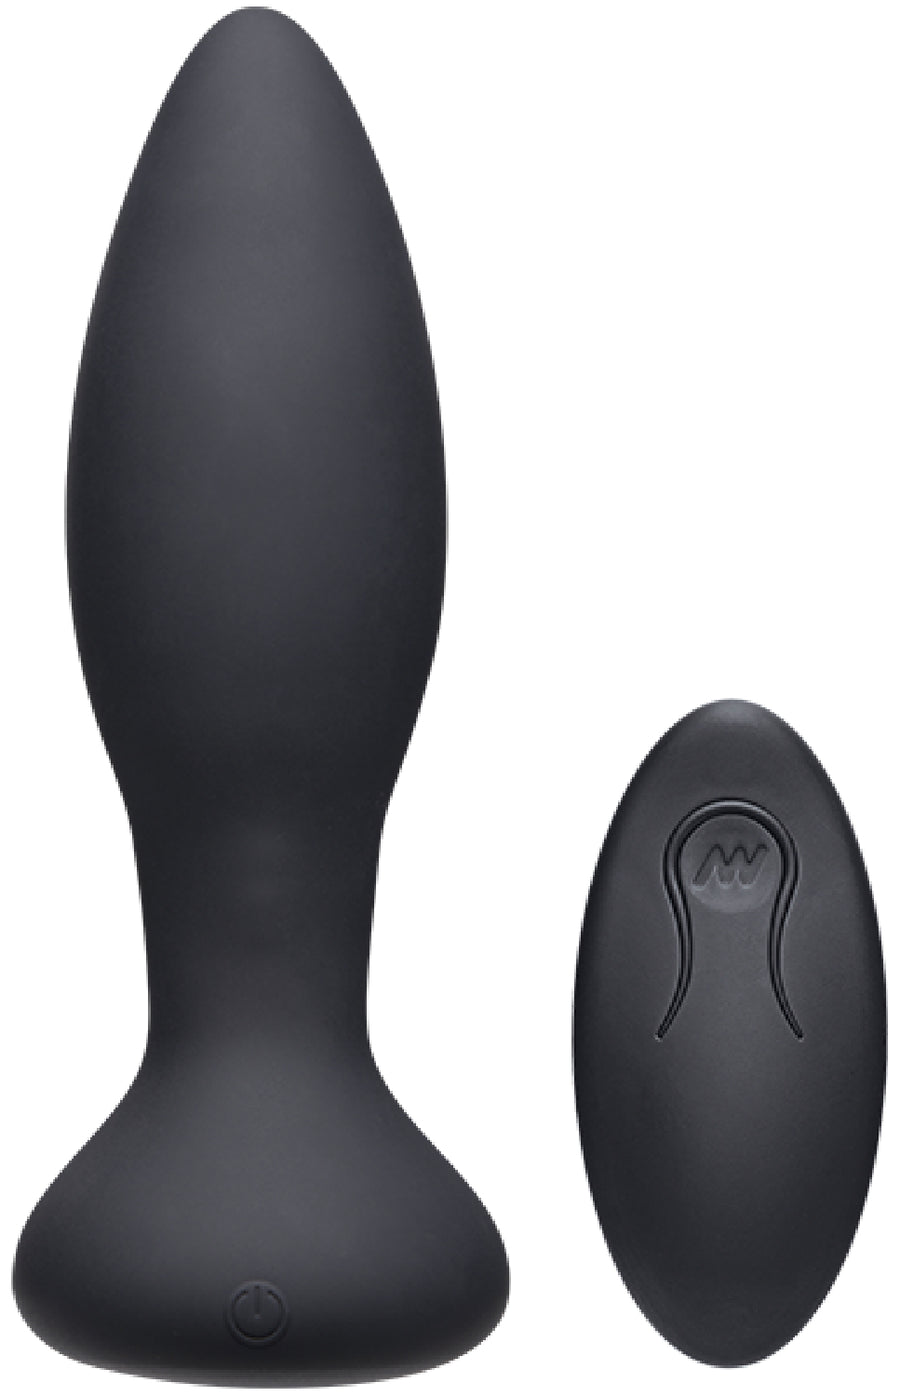 Thrust - Experienced - Rechargeable Silicone Anal Plug With Remote (Black)